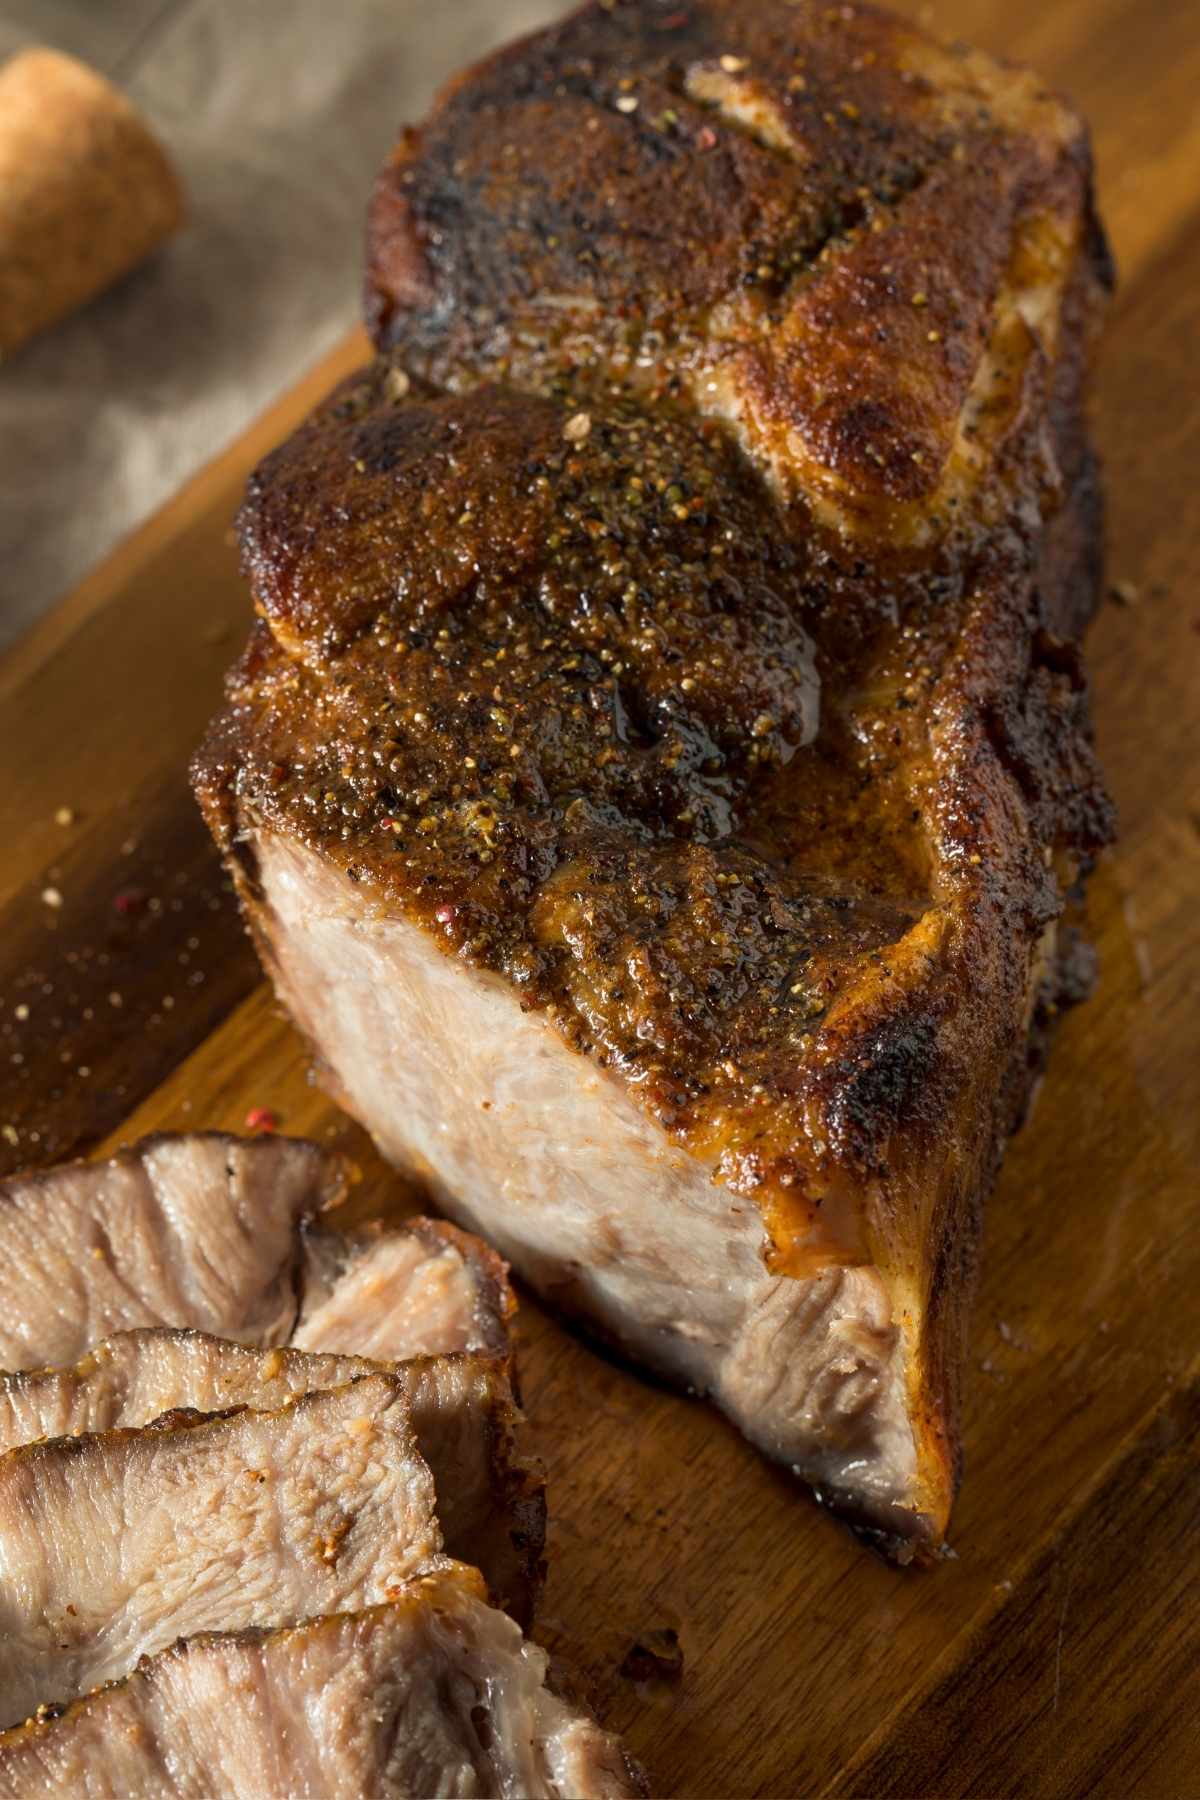 Learn how to properly cook pork butt so it’s moist and juicy, and a guide on the appropriate internal temperature.